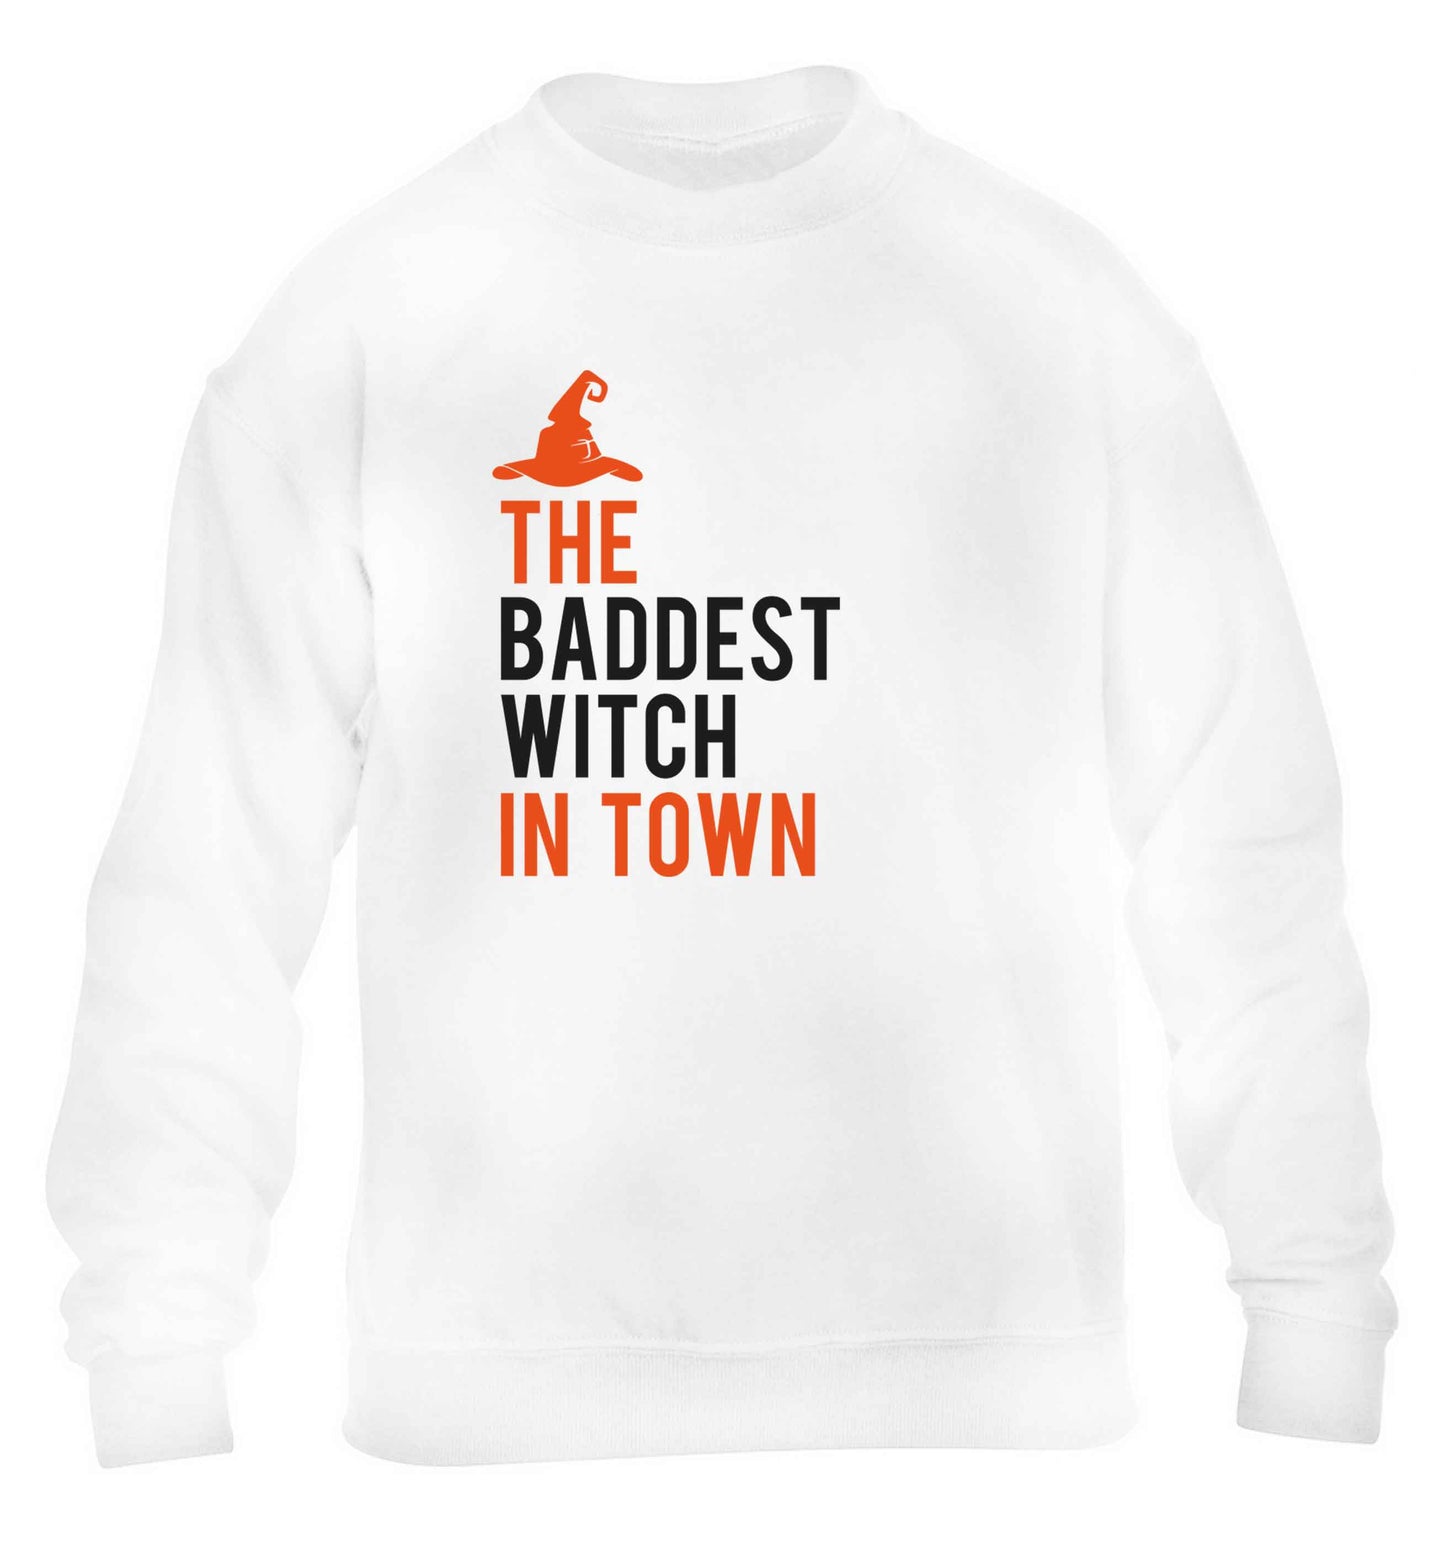 Badest witch in town children's white sweater 12-13 Years